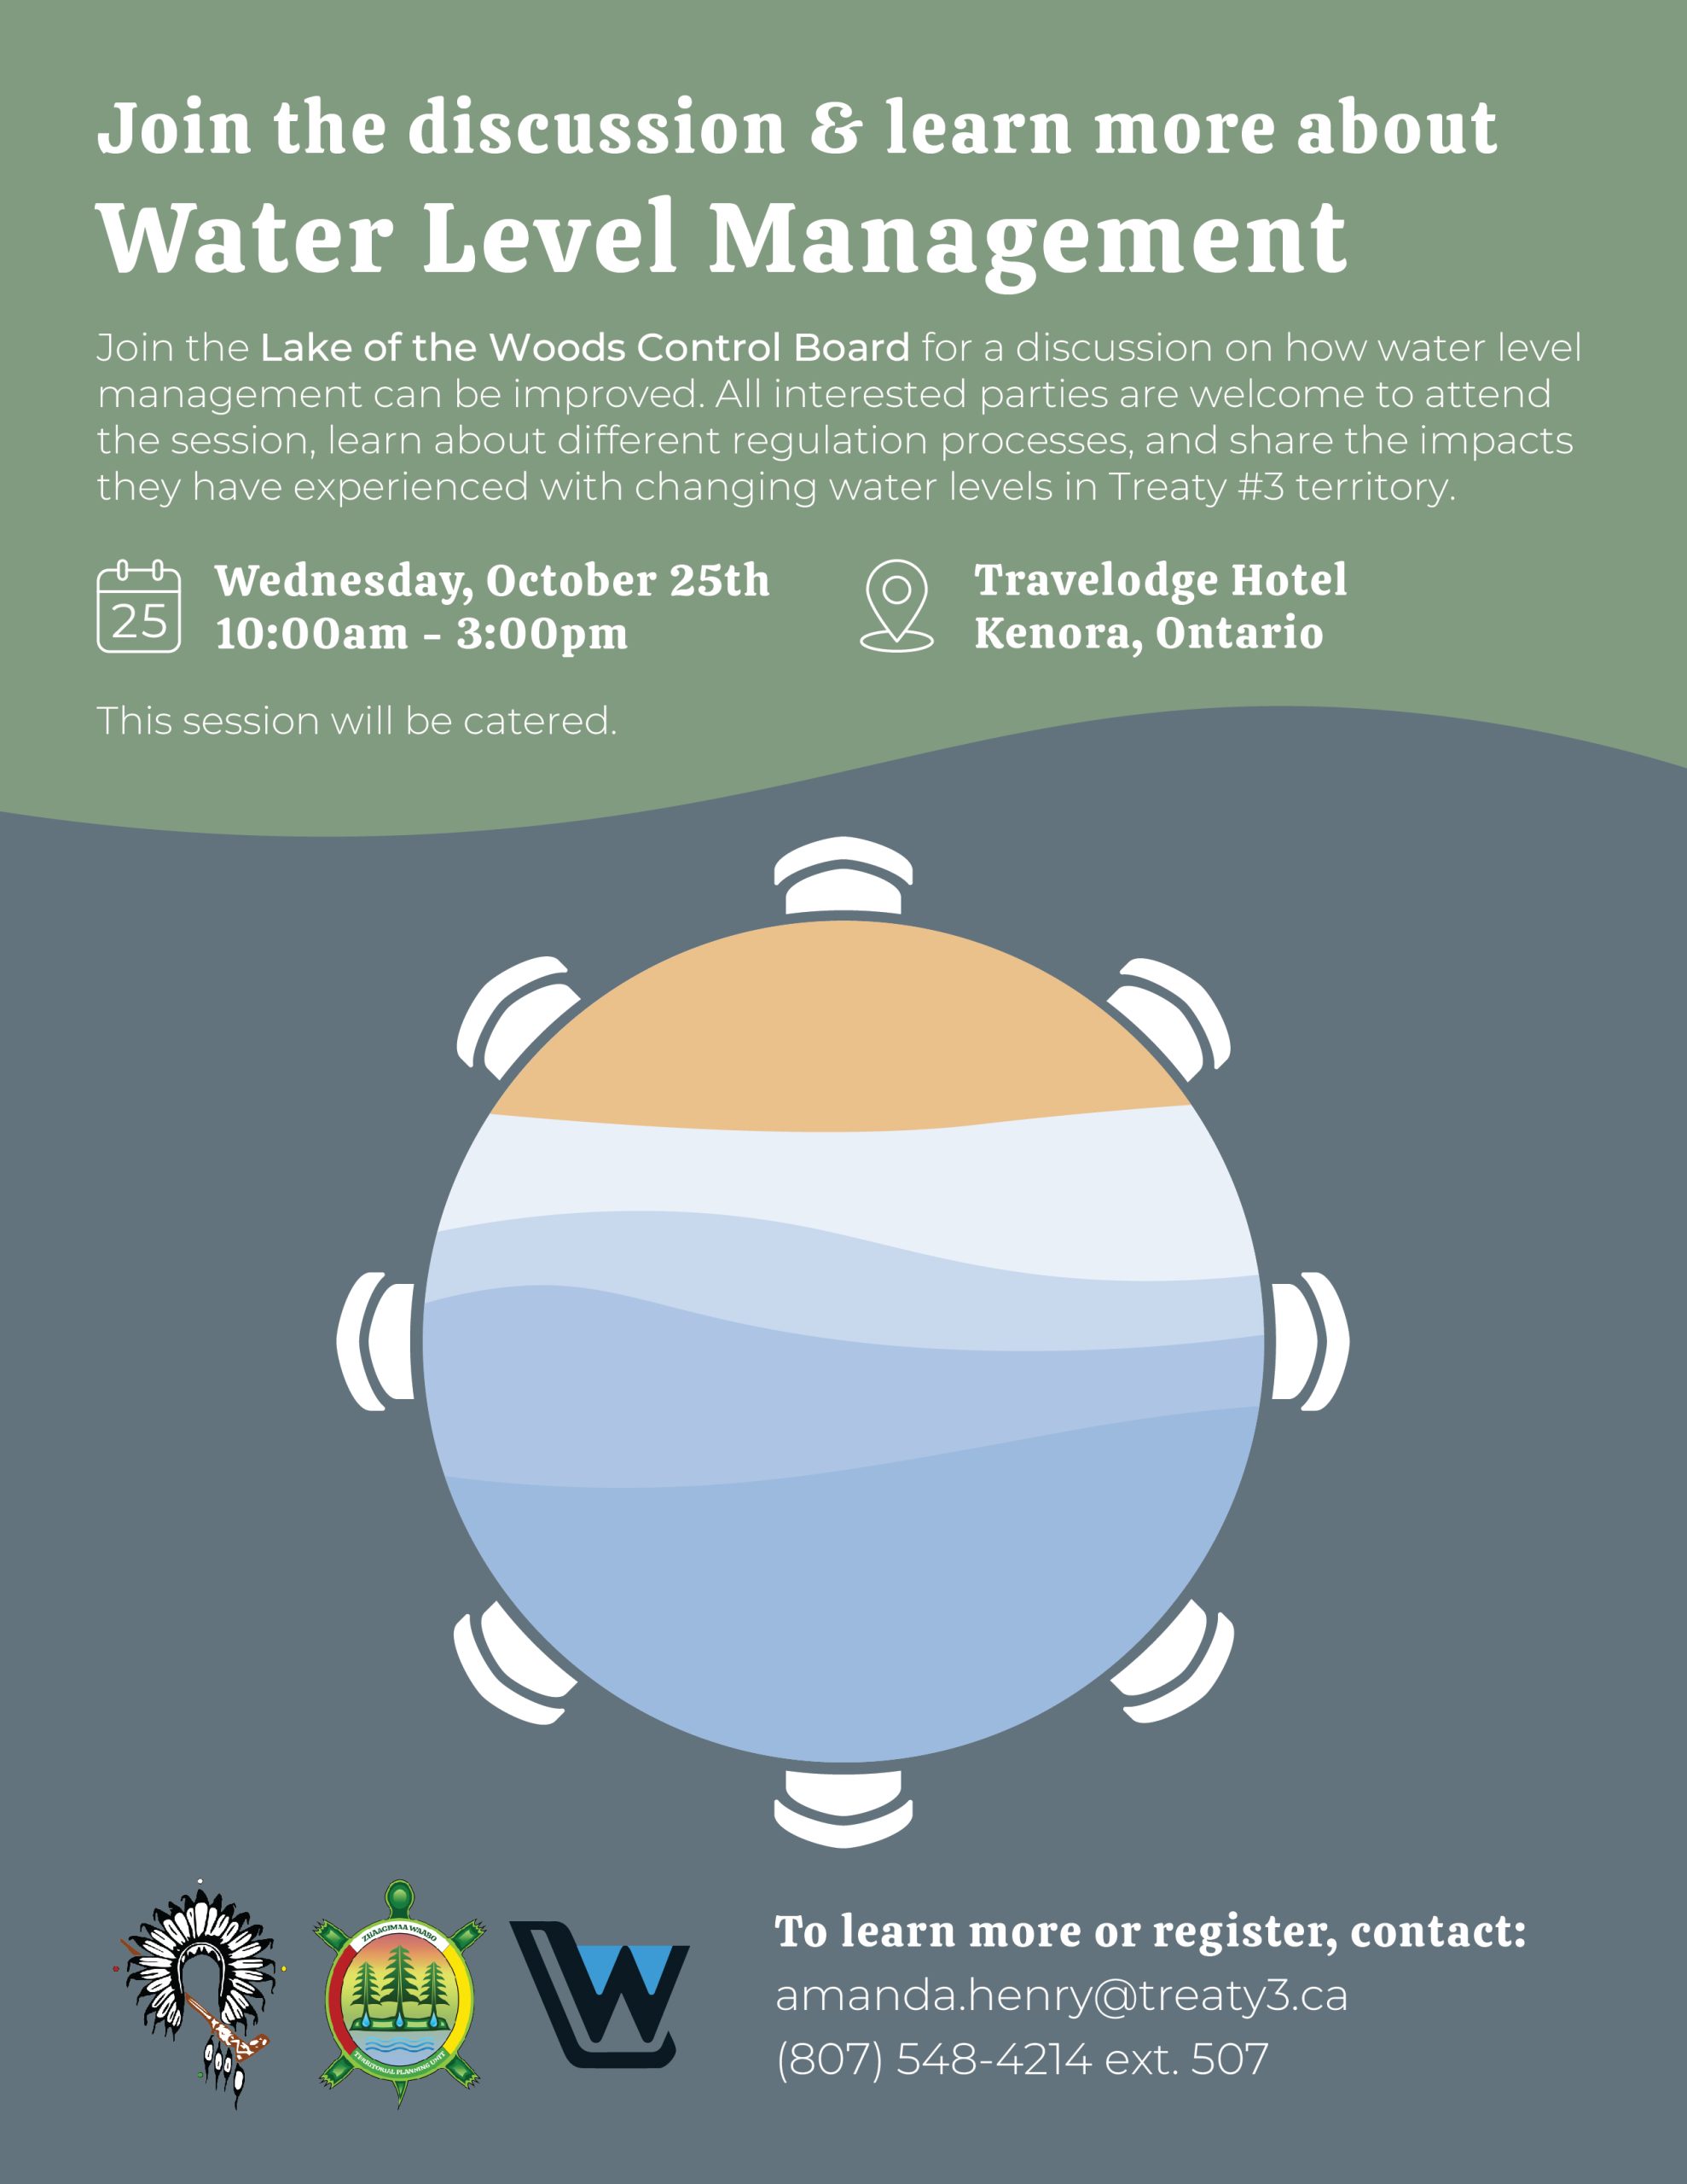 LWCB Water Level Management Session